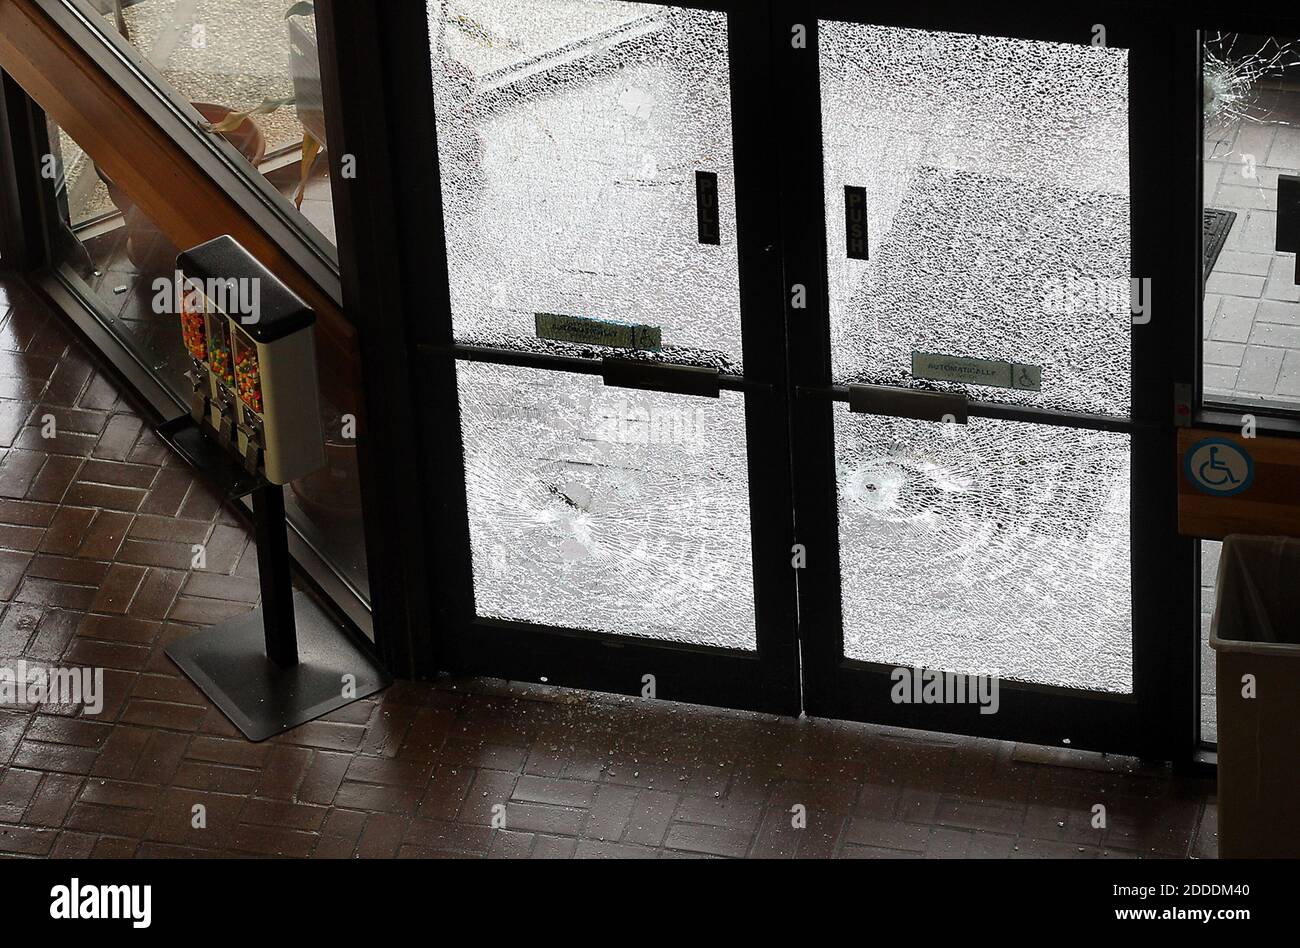 NO FILM, NO VIDEO, NO TV, NO DOCUMENTARY - Bullets shattered glass windows and doors, spraying glass inside police headquarters on Friday, November 28, 2014 after a gunman, identified by law enforcement sources as Larry Steve McQuilliams, targeted buildings in downtown Austin, TX, USA, including the Mexican consulate, the federal courthouse and Austin police headquarters before being shot and killed by police Friday morning in Austin, Texas. Photo by Laura Skelding/Austin American-Statesman/TNS/ABACAPRESS.COM Stock Photo